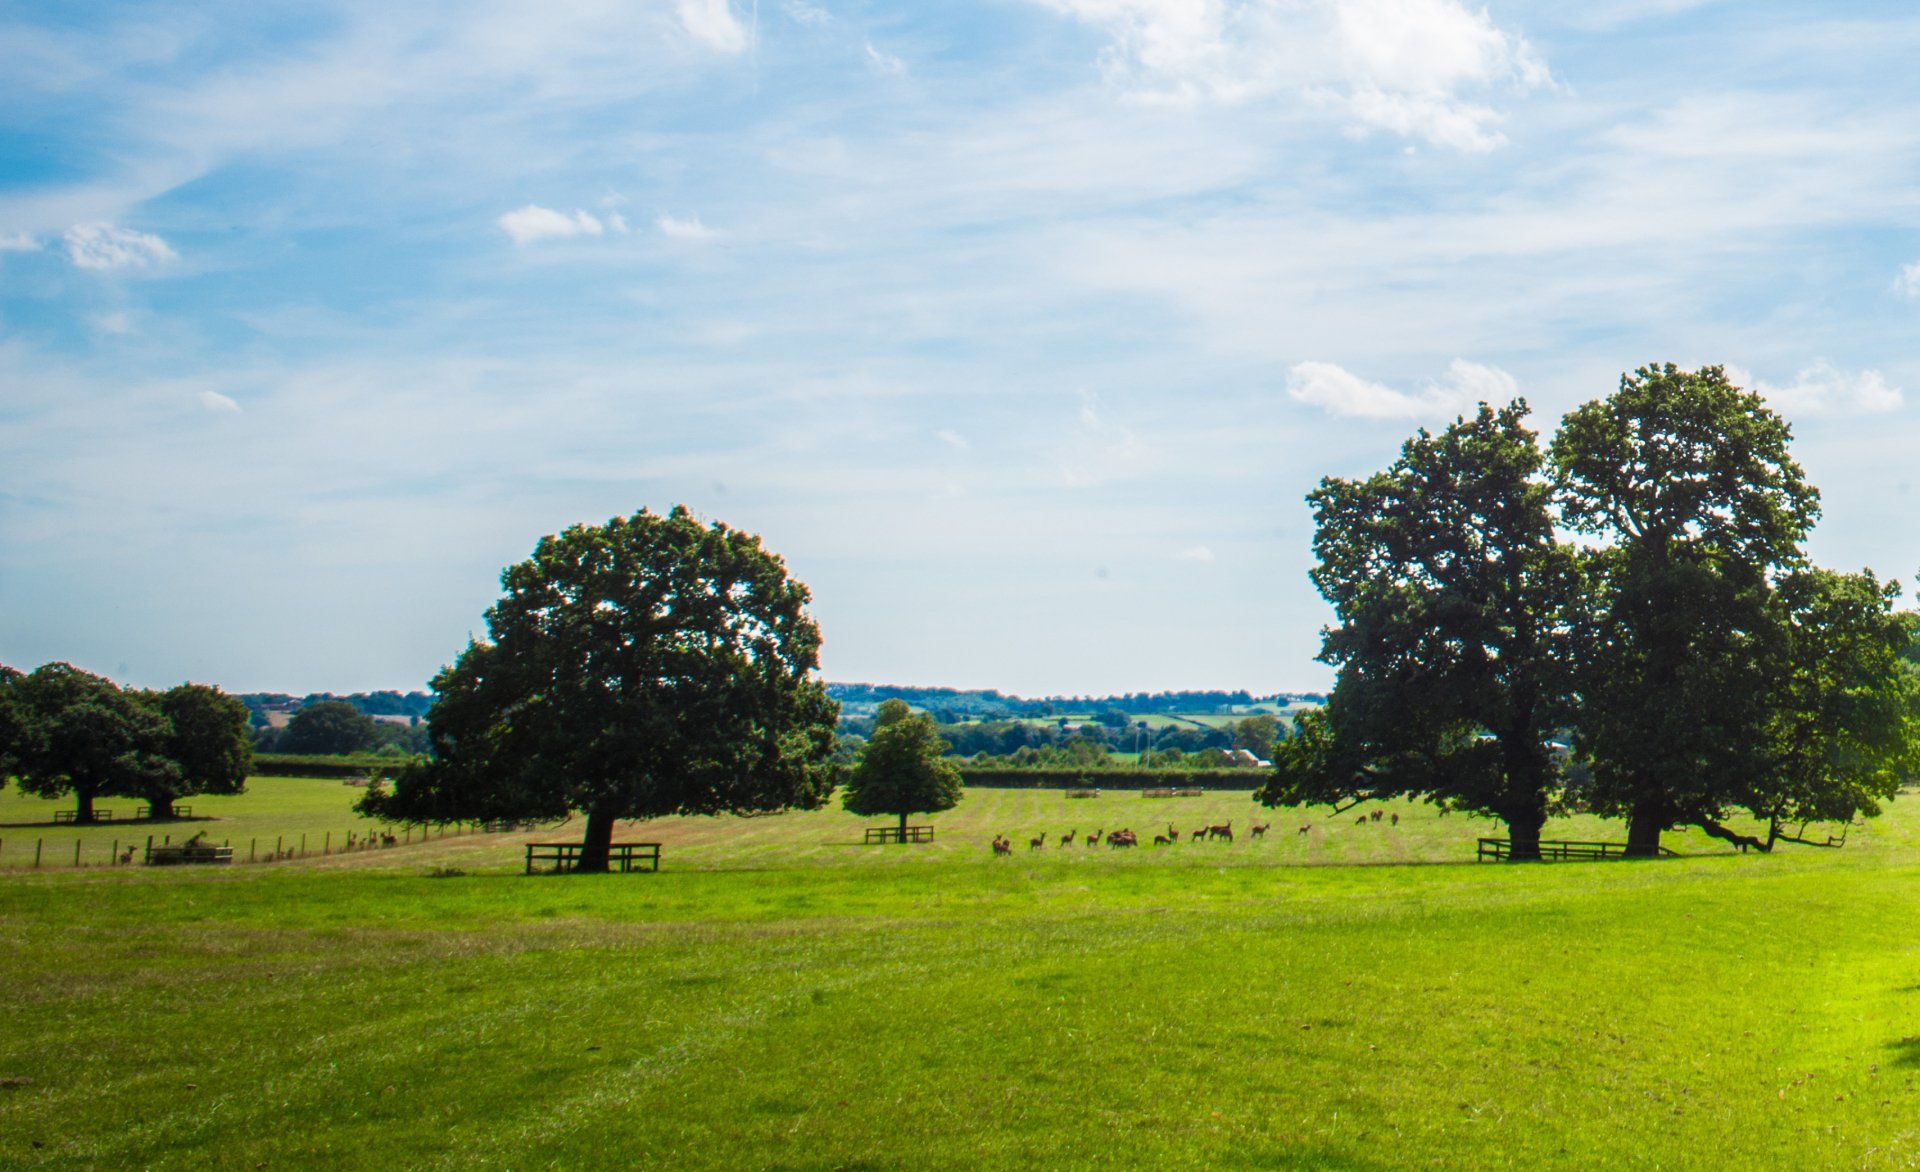 Countryside view of Nottinghamshire from office location with large trees and heard of deer